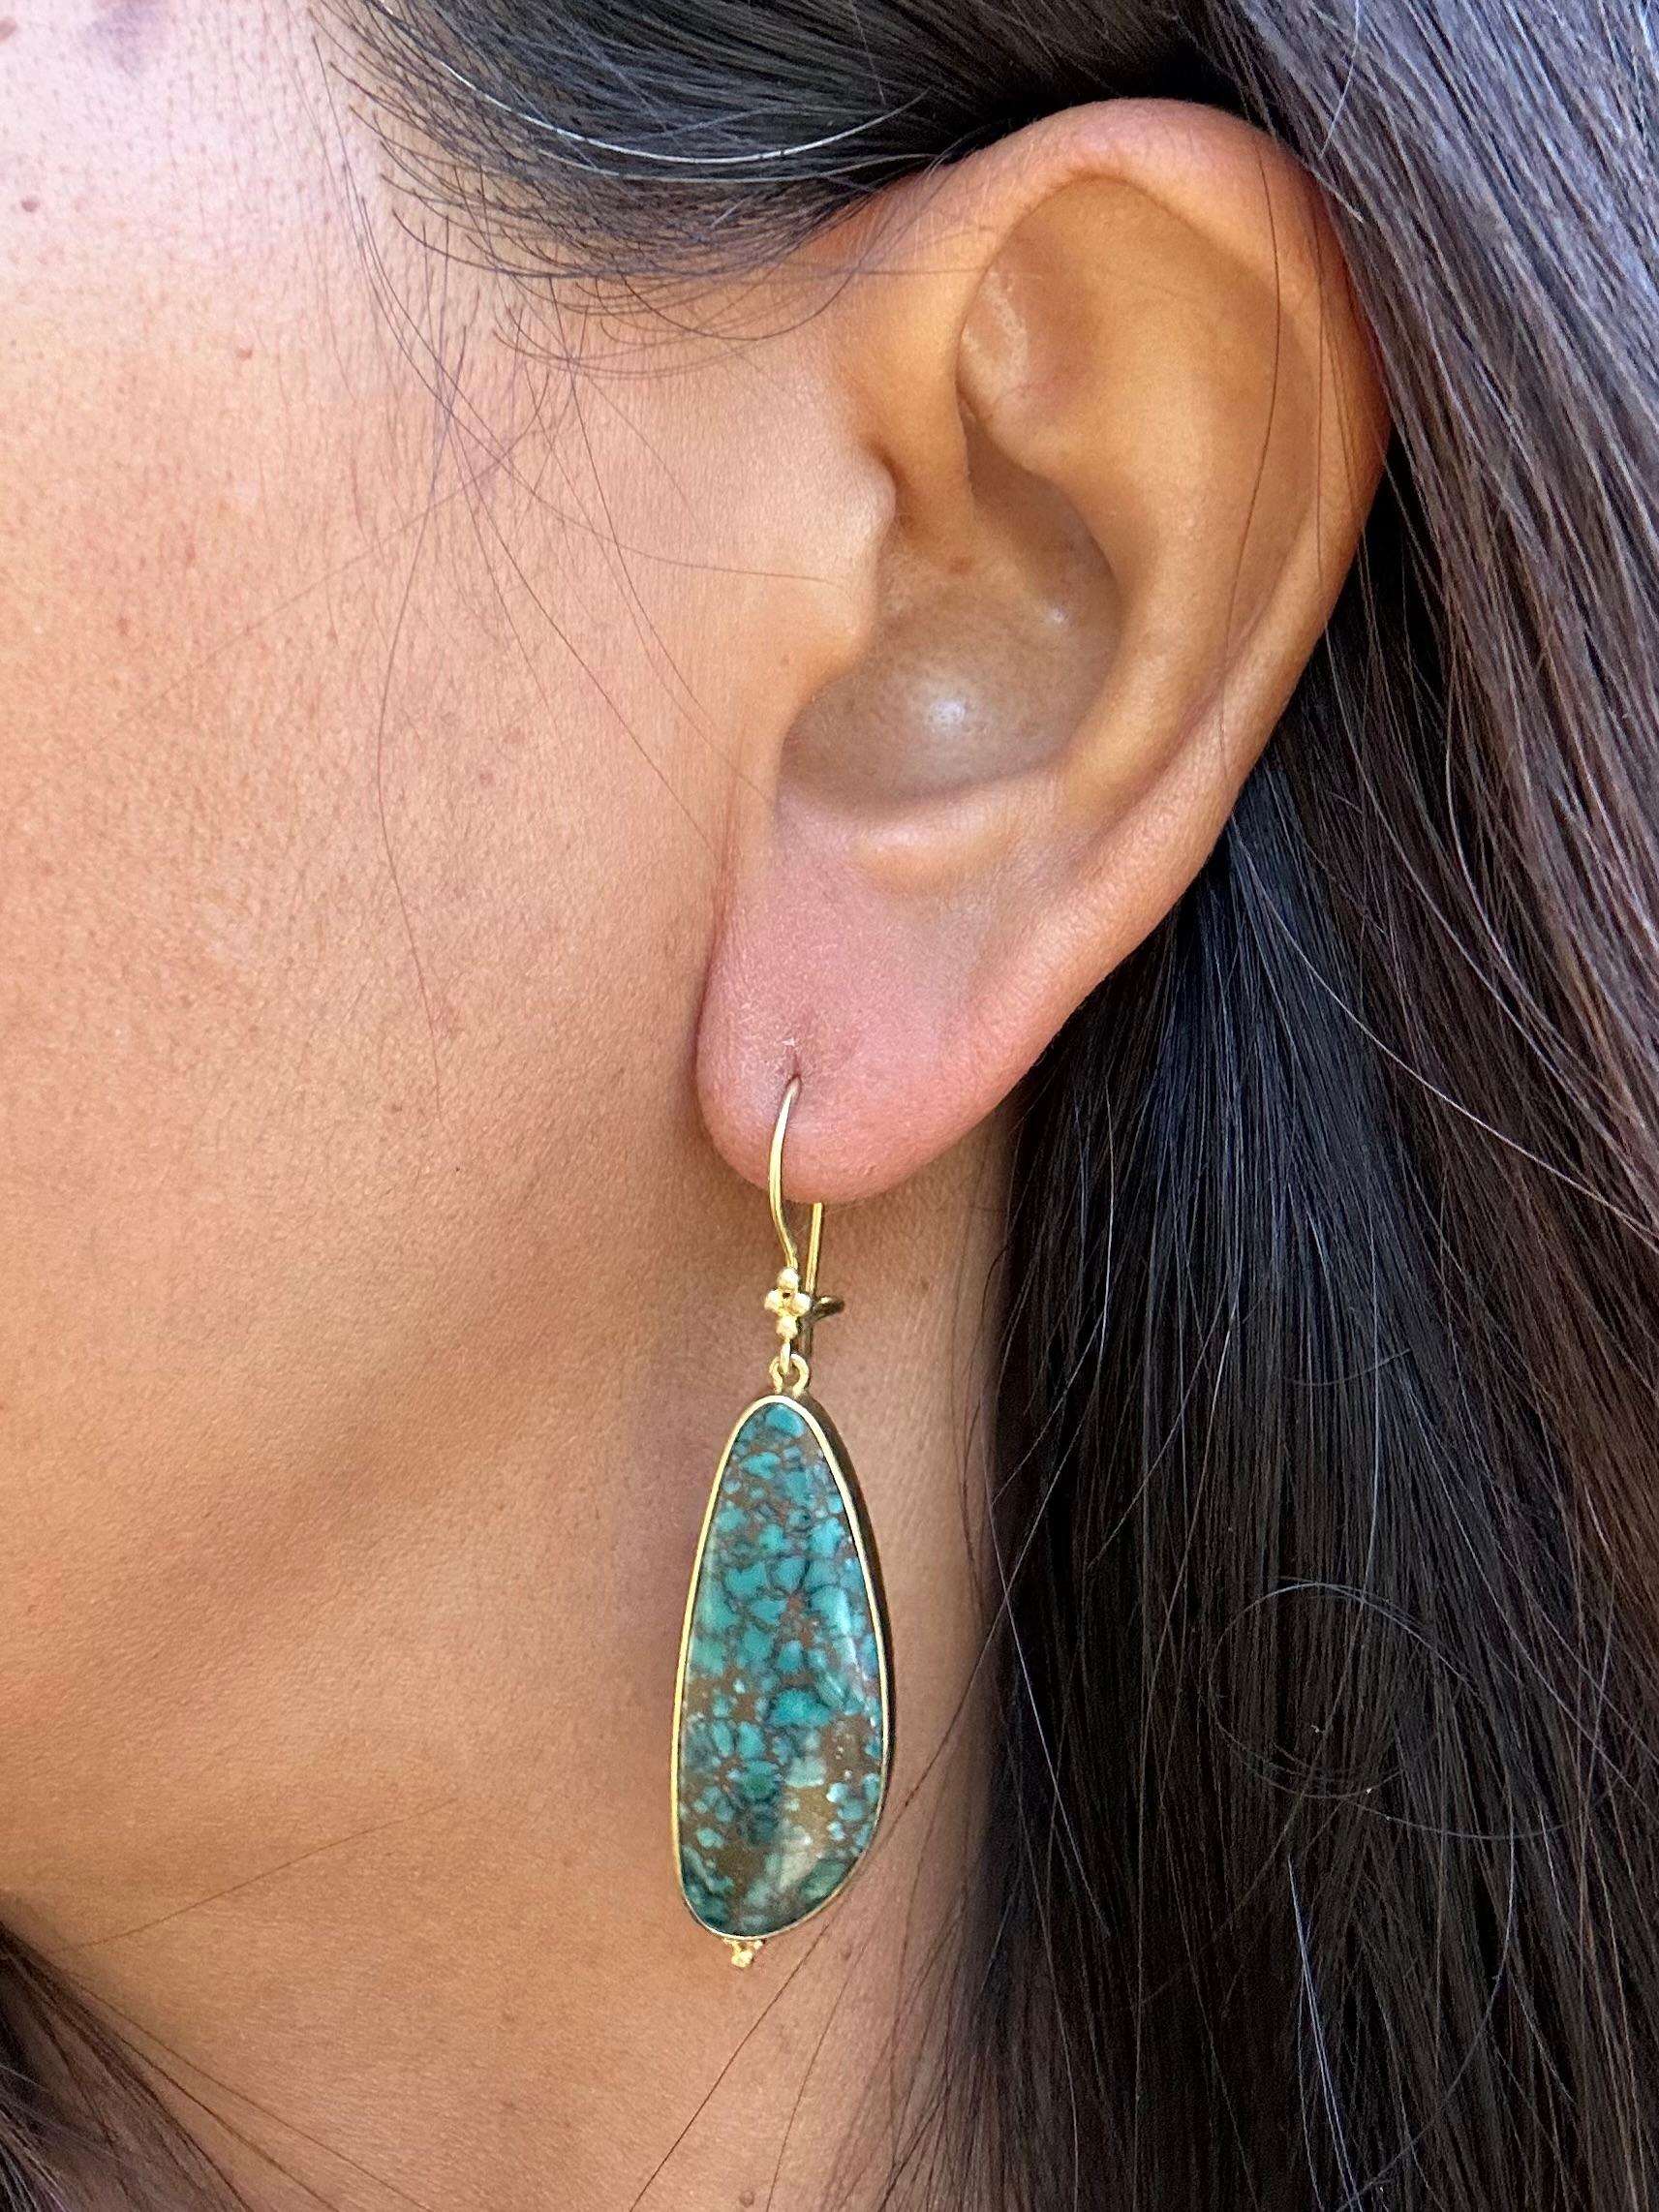 Steven Battelle 24.1 Carats Variegated Turquoise 18K Gold Wire Earrings For Sale 1